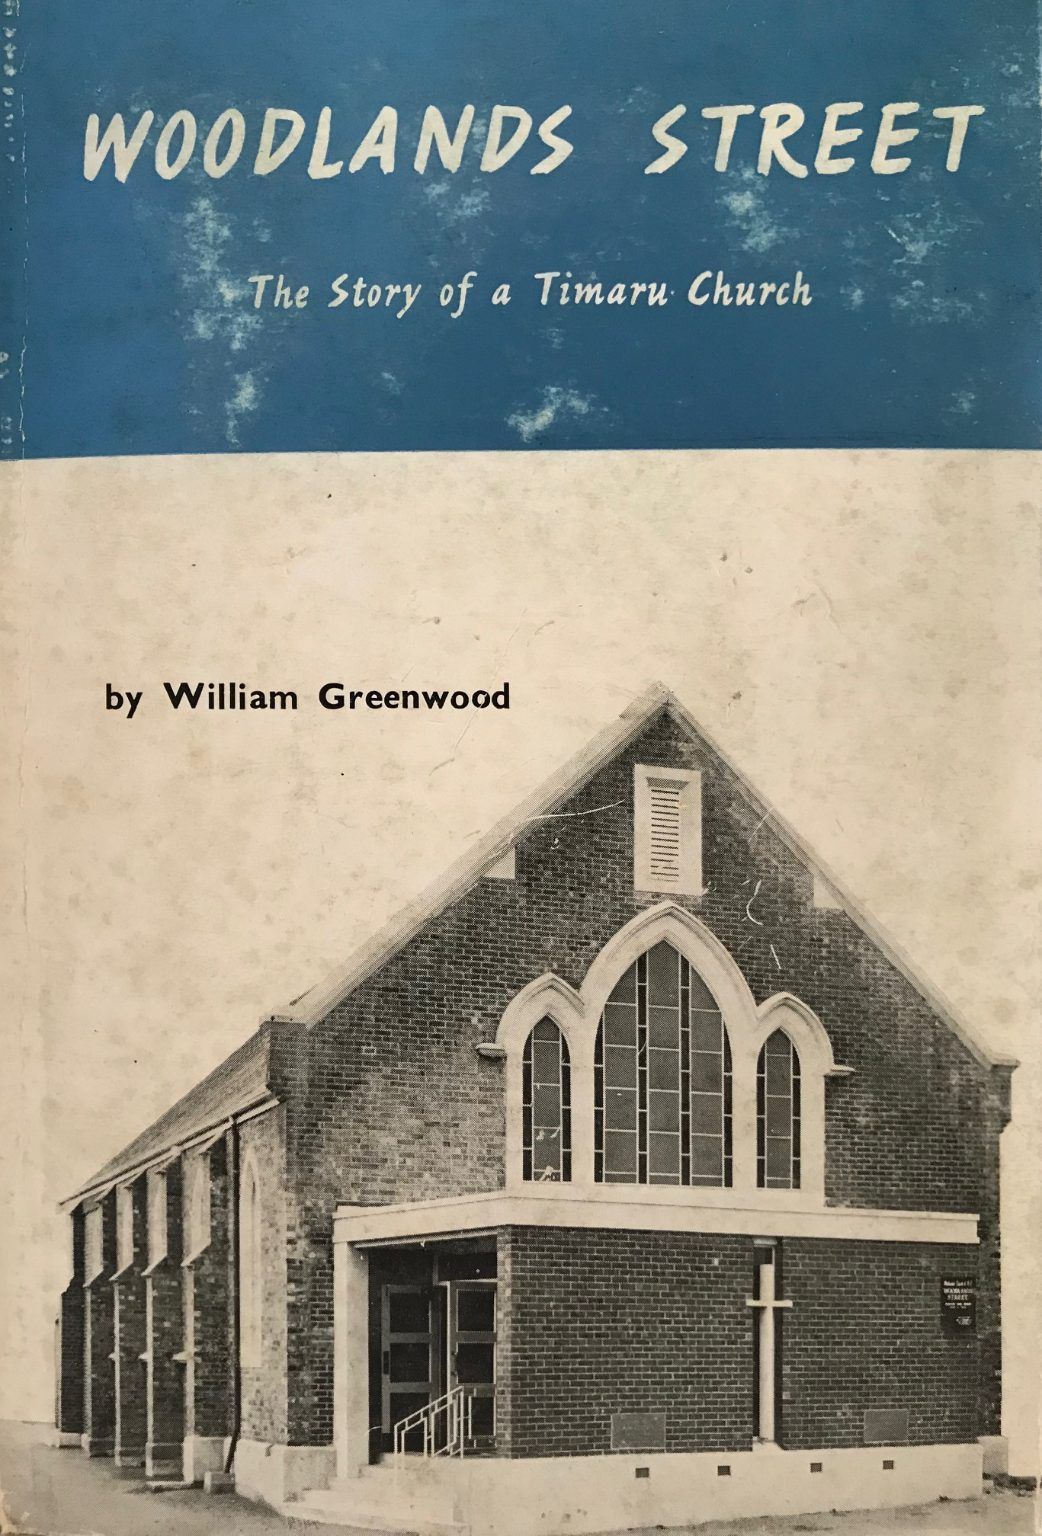 WOODLANDS STREET: The Story of a Timaru Church